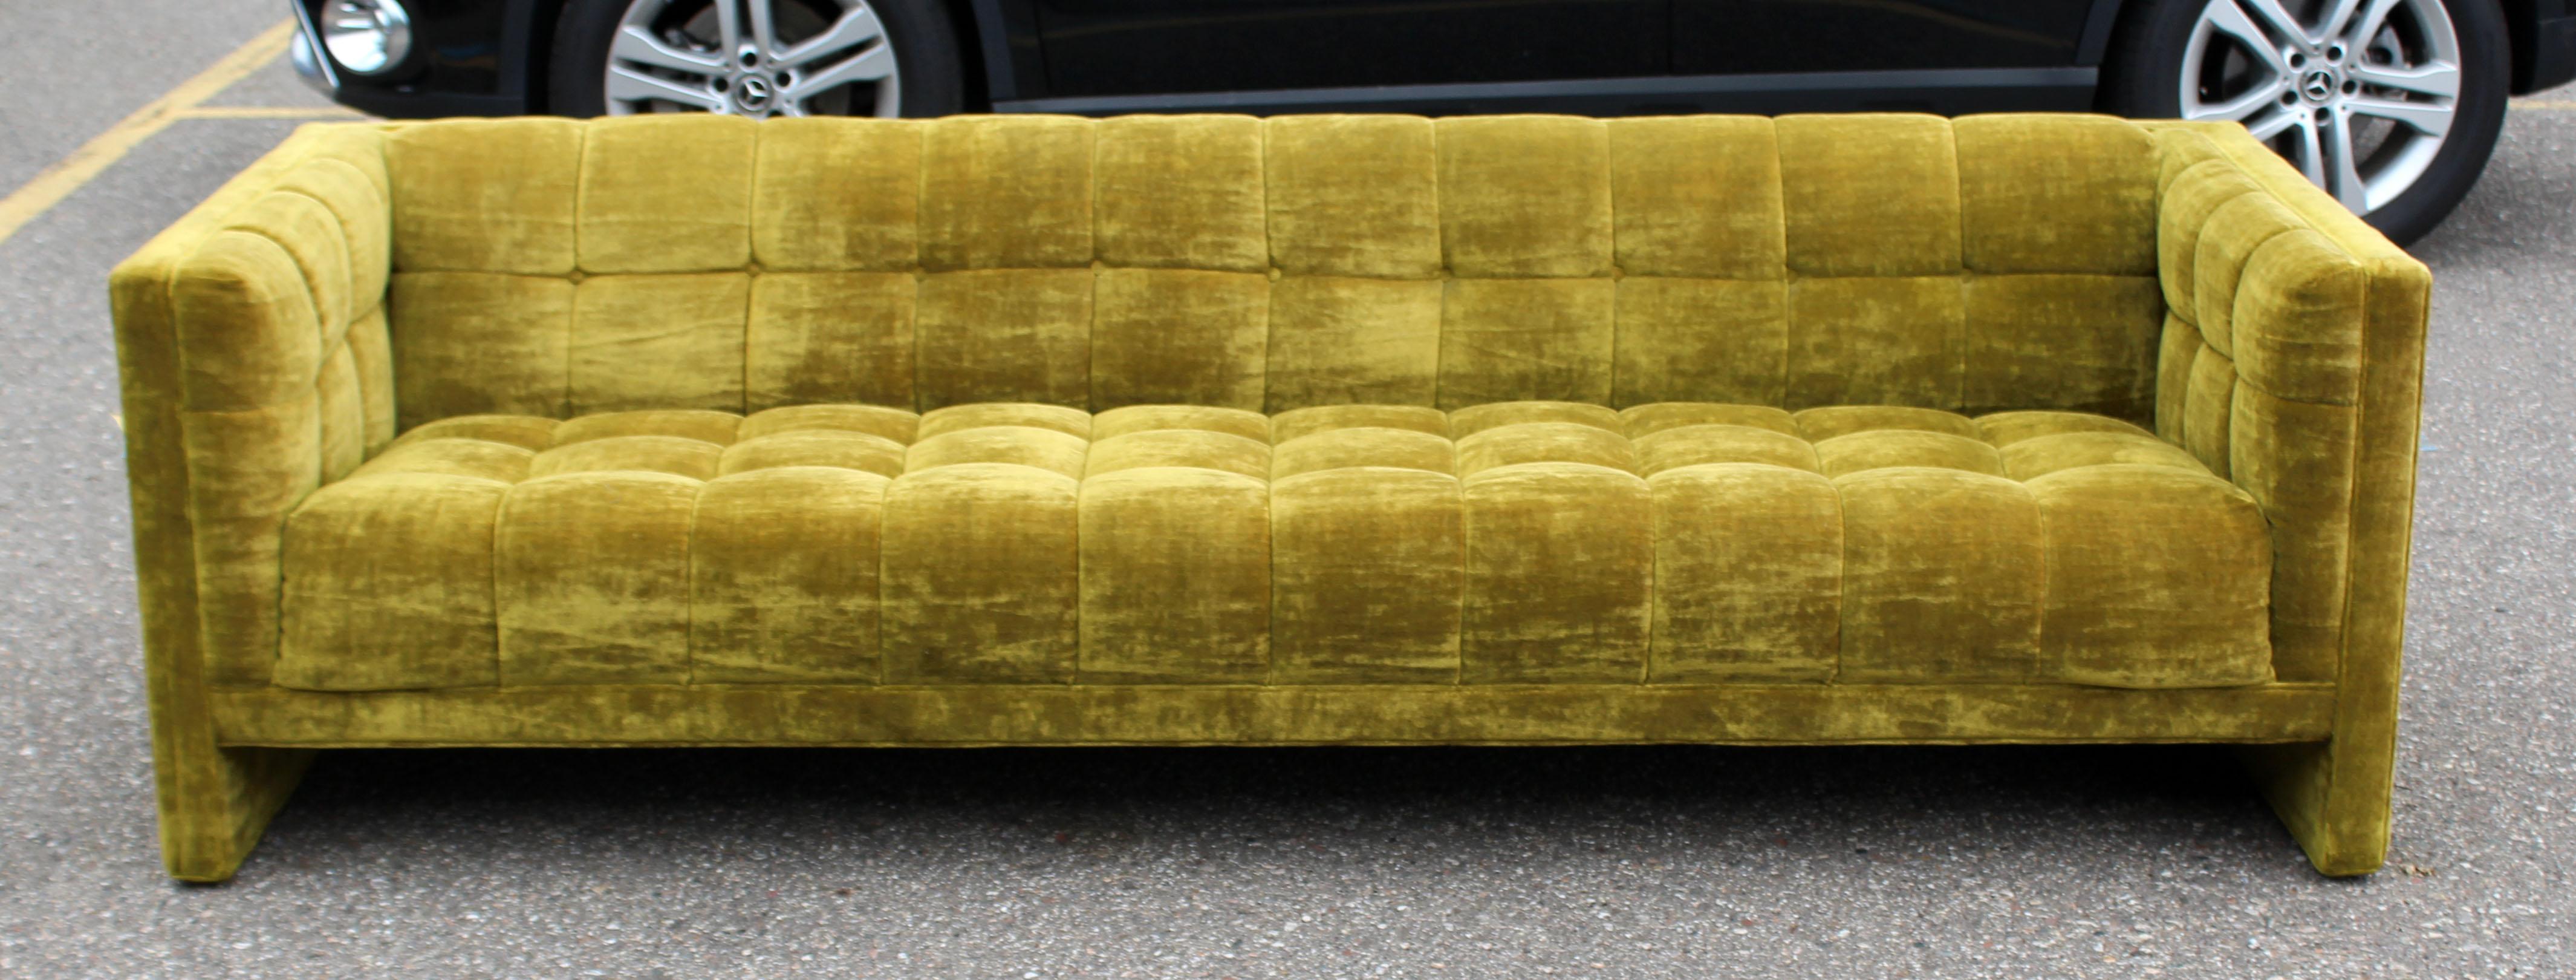 For your consideration is a magnificent, tufted tuxedo avocado green velvet sofa, by Milo Baughman for Englanders, circa1969. Comes with original tags. Fabric is noted as CXhevelle 50. In excellent condition. The dimensions are 89